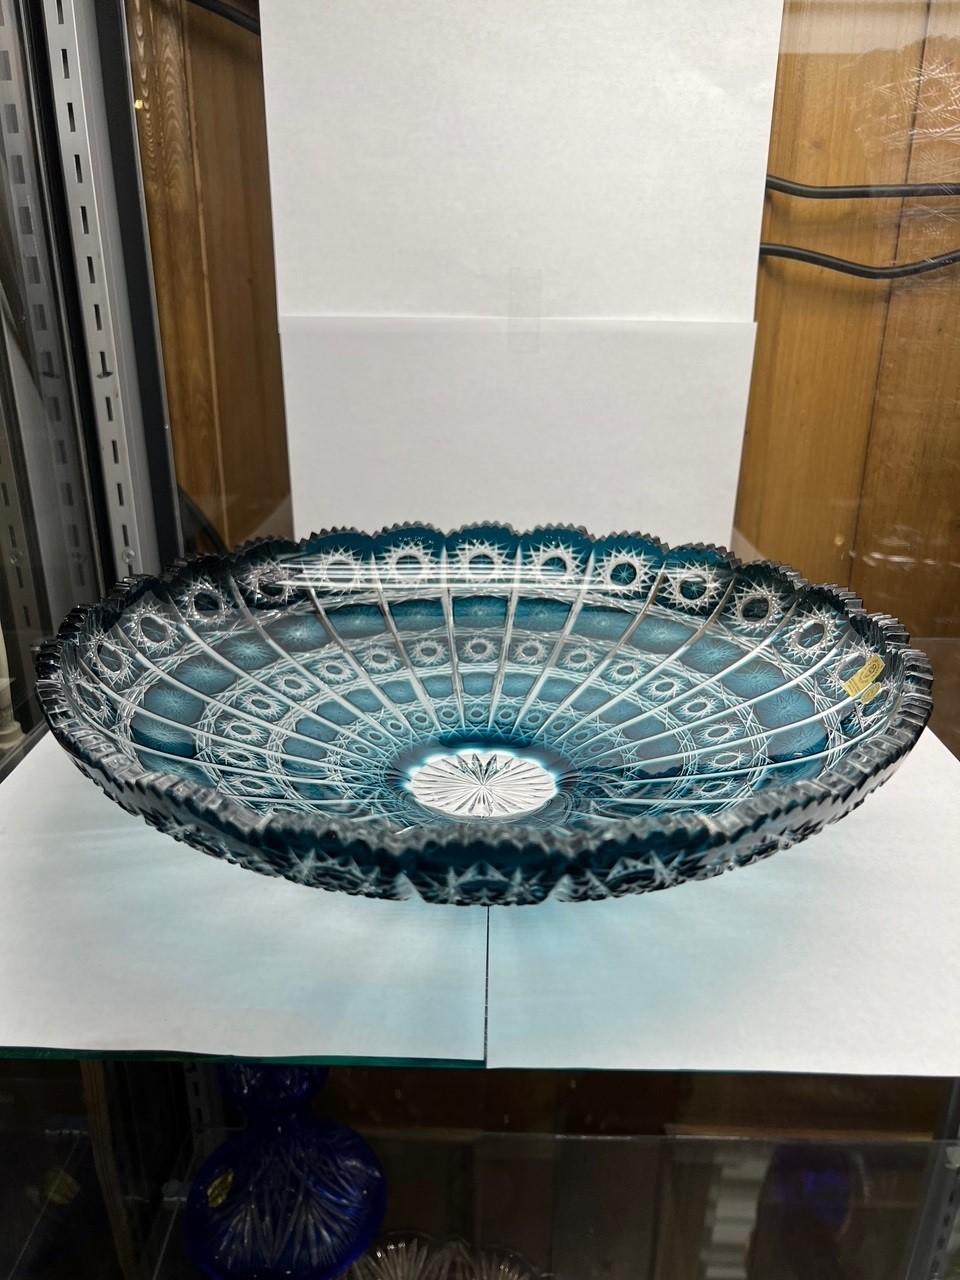 Stunning hand cut lead crystal low fruit bowl created as a work of art by the hands of the finest Czech glass workers. The Caesar Crystal Company in the Czech Republic has been selling hand cut lead crystal pieces since 1861 and is known as one of